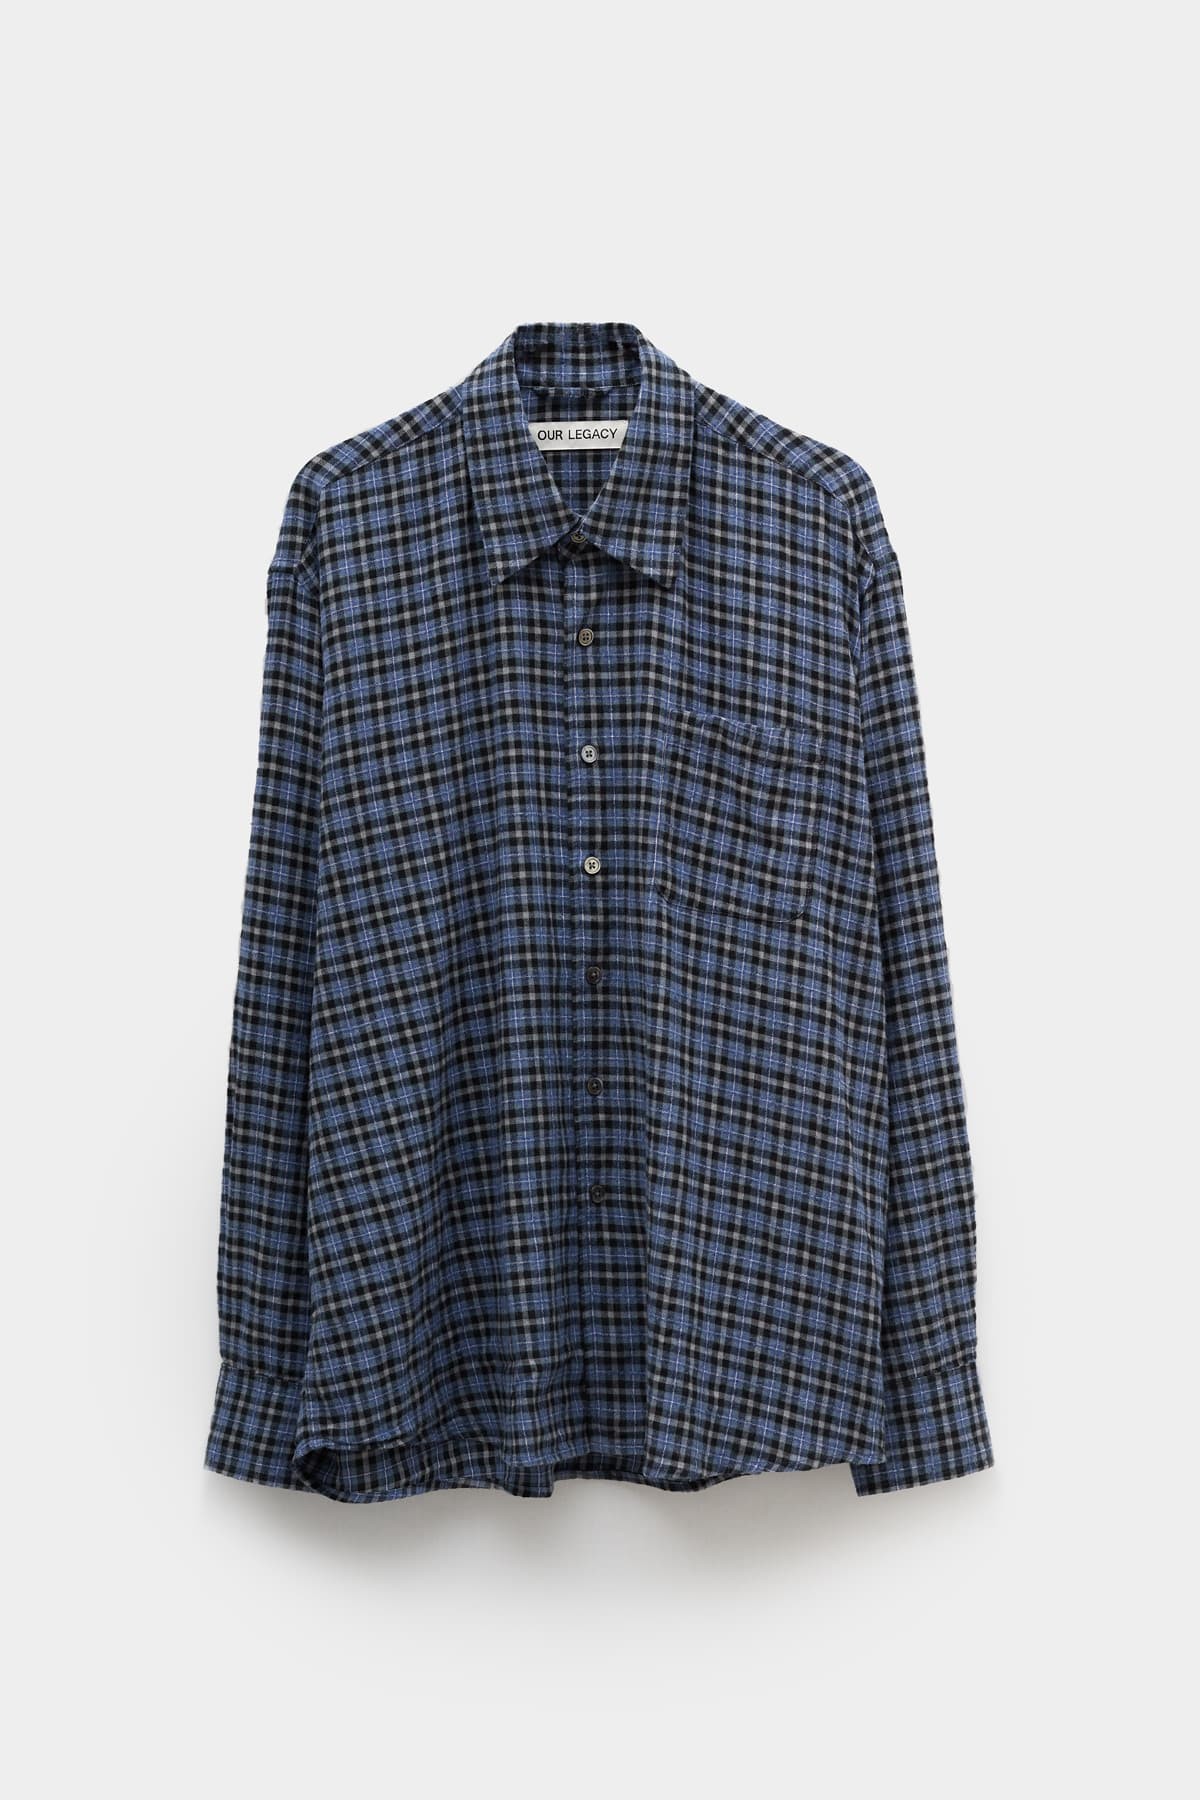 OUR LEGACY BLUE CANTRELL CHECK ABOVE SHIRT IAMNUE